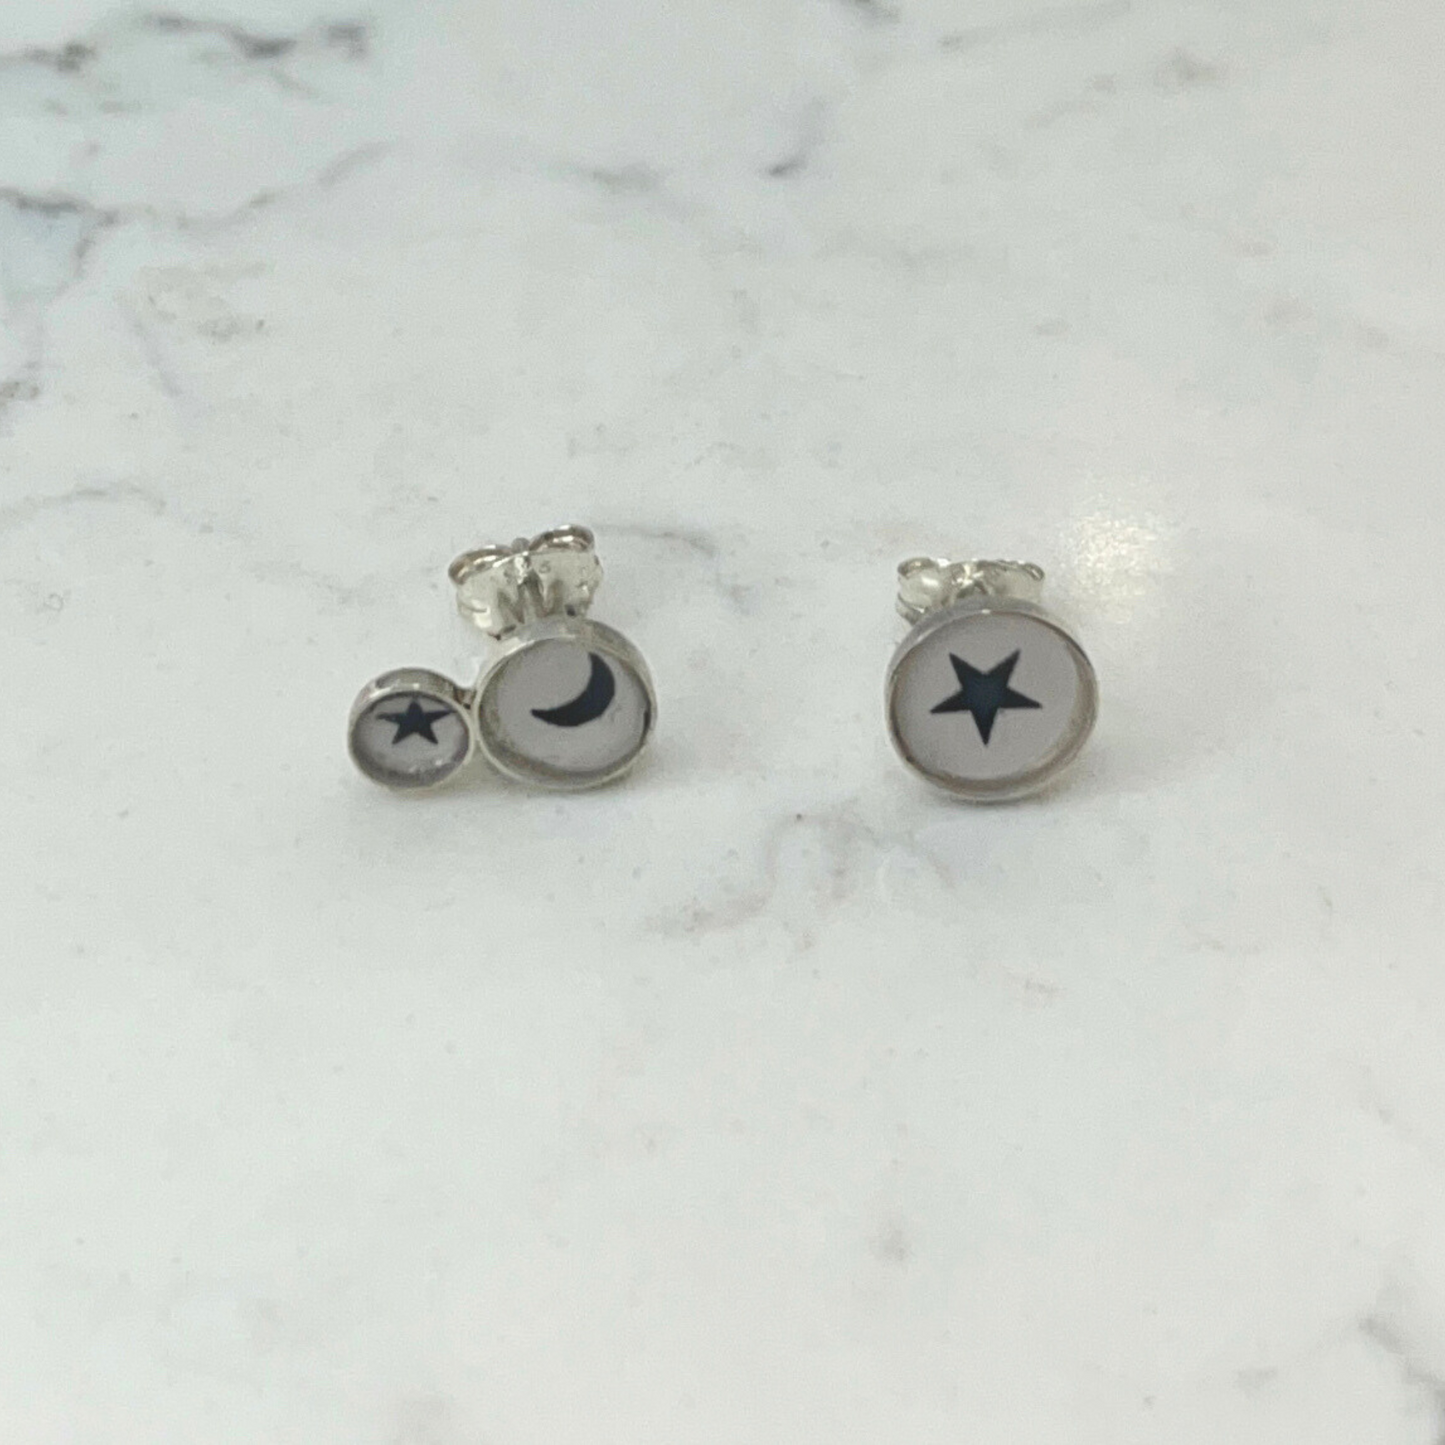 CLARE COLLISON - Offset Sterling Silver Studs - Stars and Moons